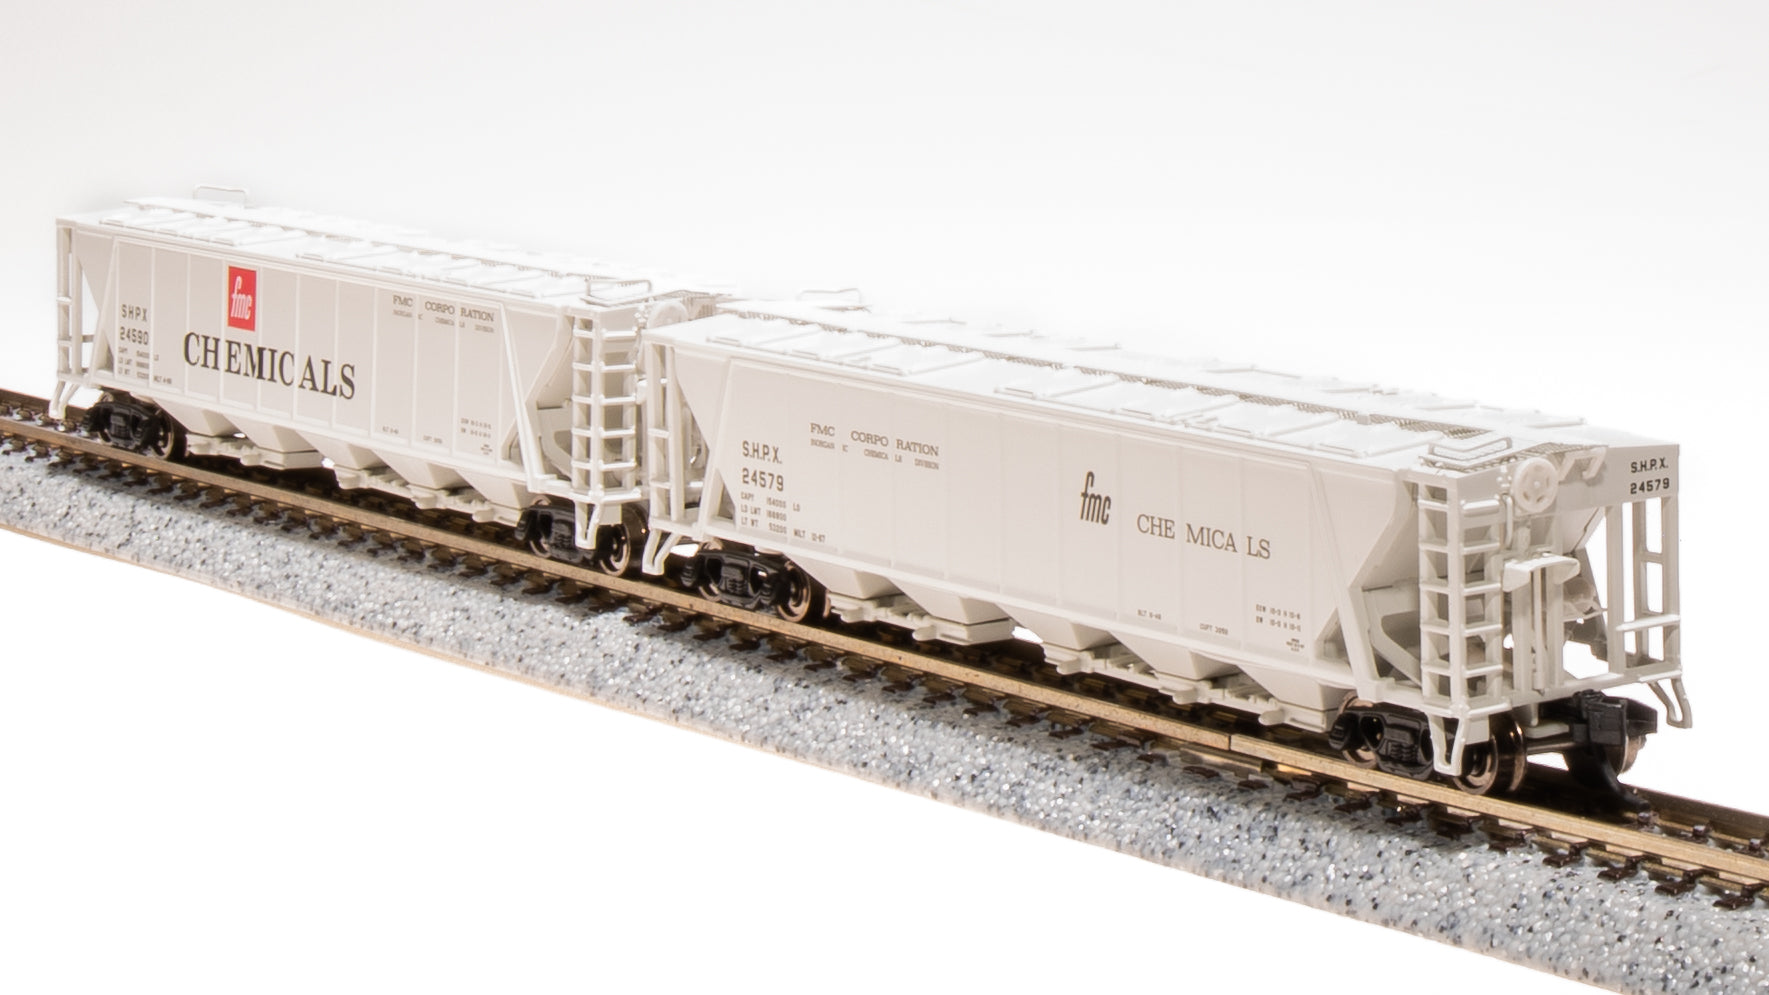 7265 H32 Covered Hopper, FMC Chemicals, 2-pack, N Scale (Fantasy Paint Scheme) Default Title